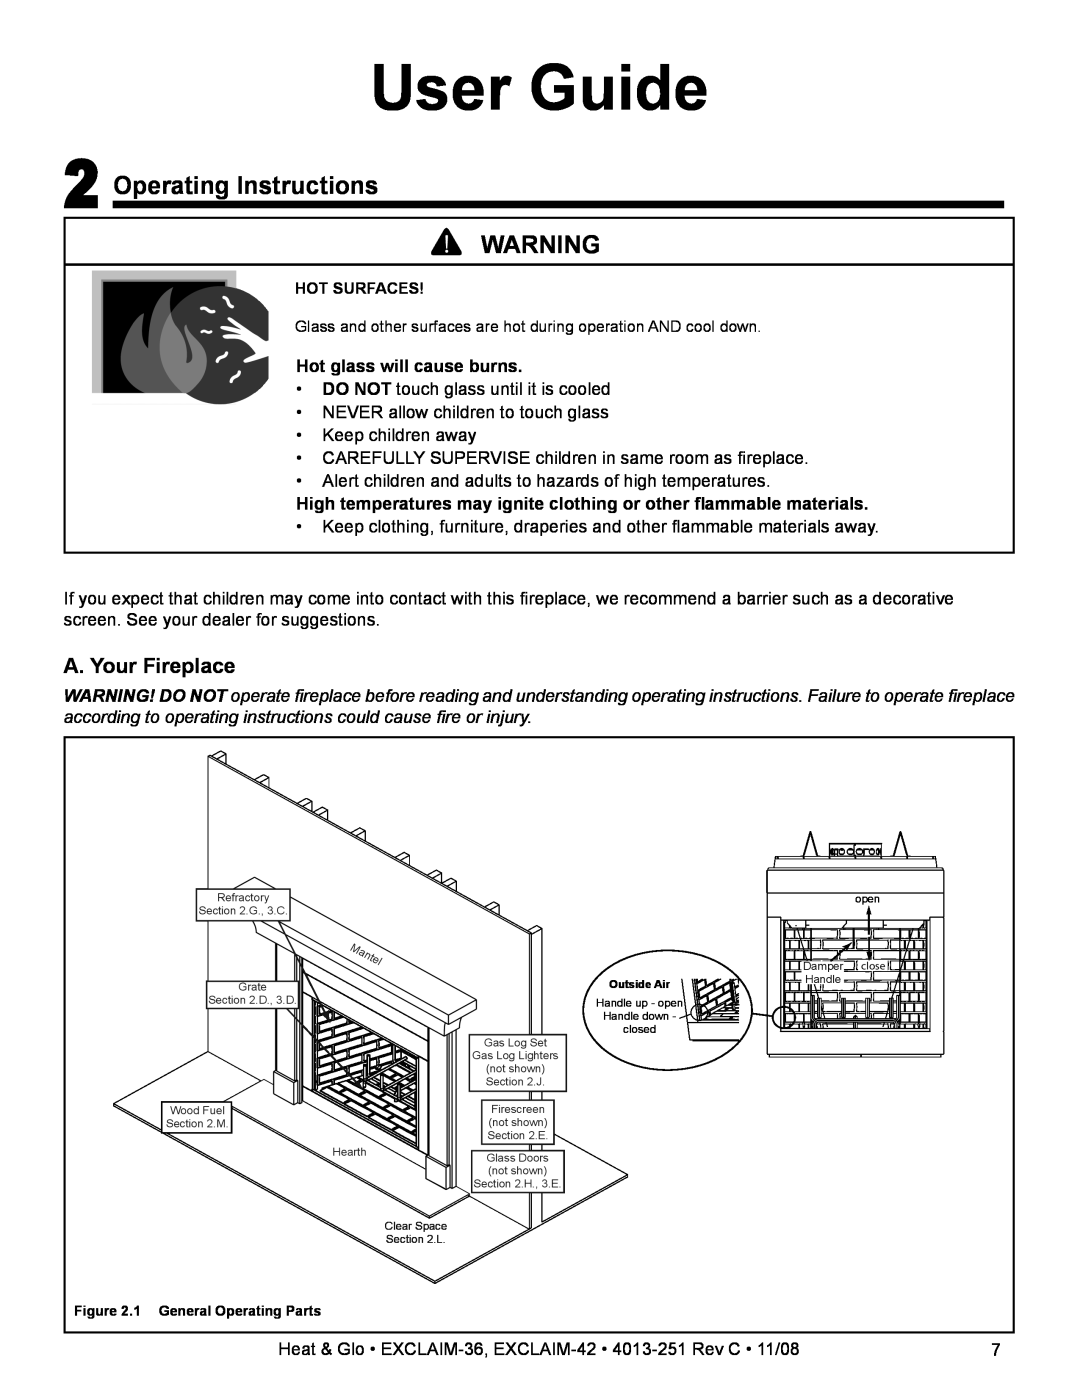 Hearth and Home Technologies EXCLAIM-36 User Guide, Operating Instructions, A. Your Fireplace, Hot glass will cause burns 